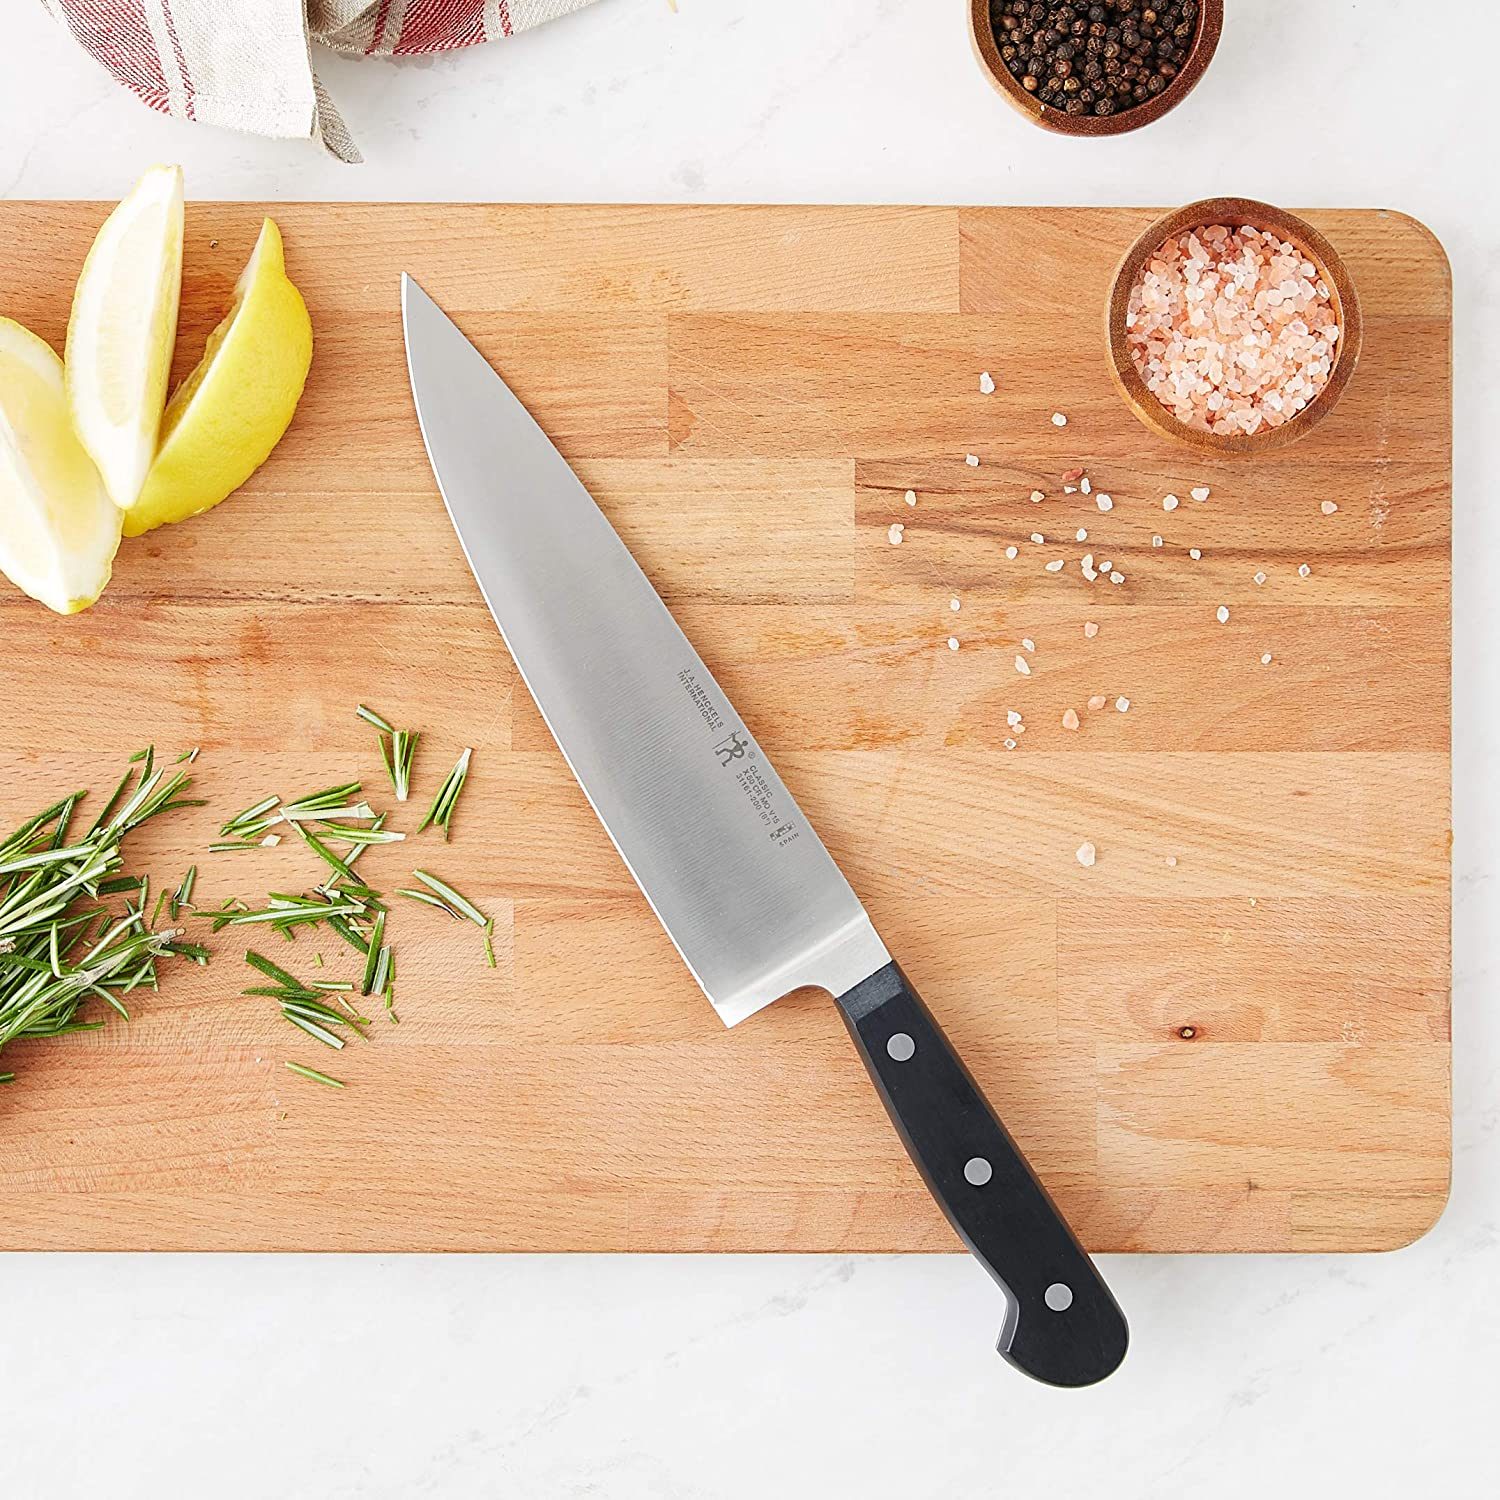 Kitchen Gadgets Every Home Chef Needs, According To Professional